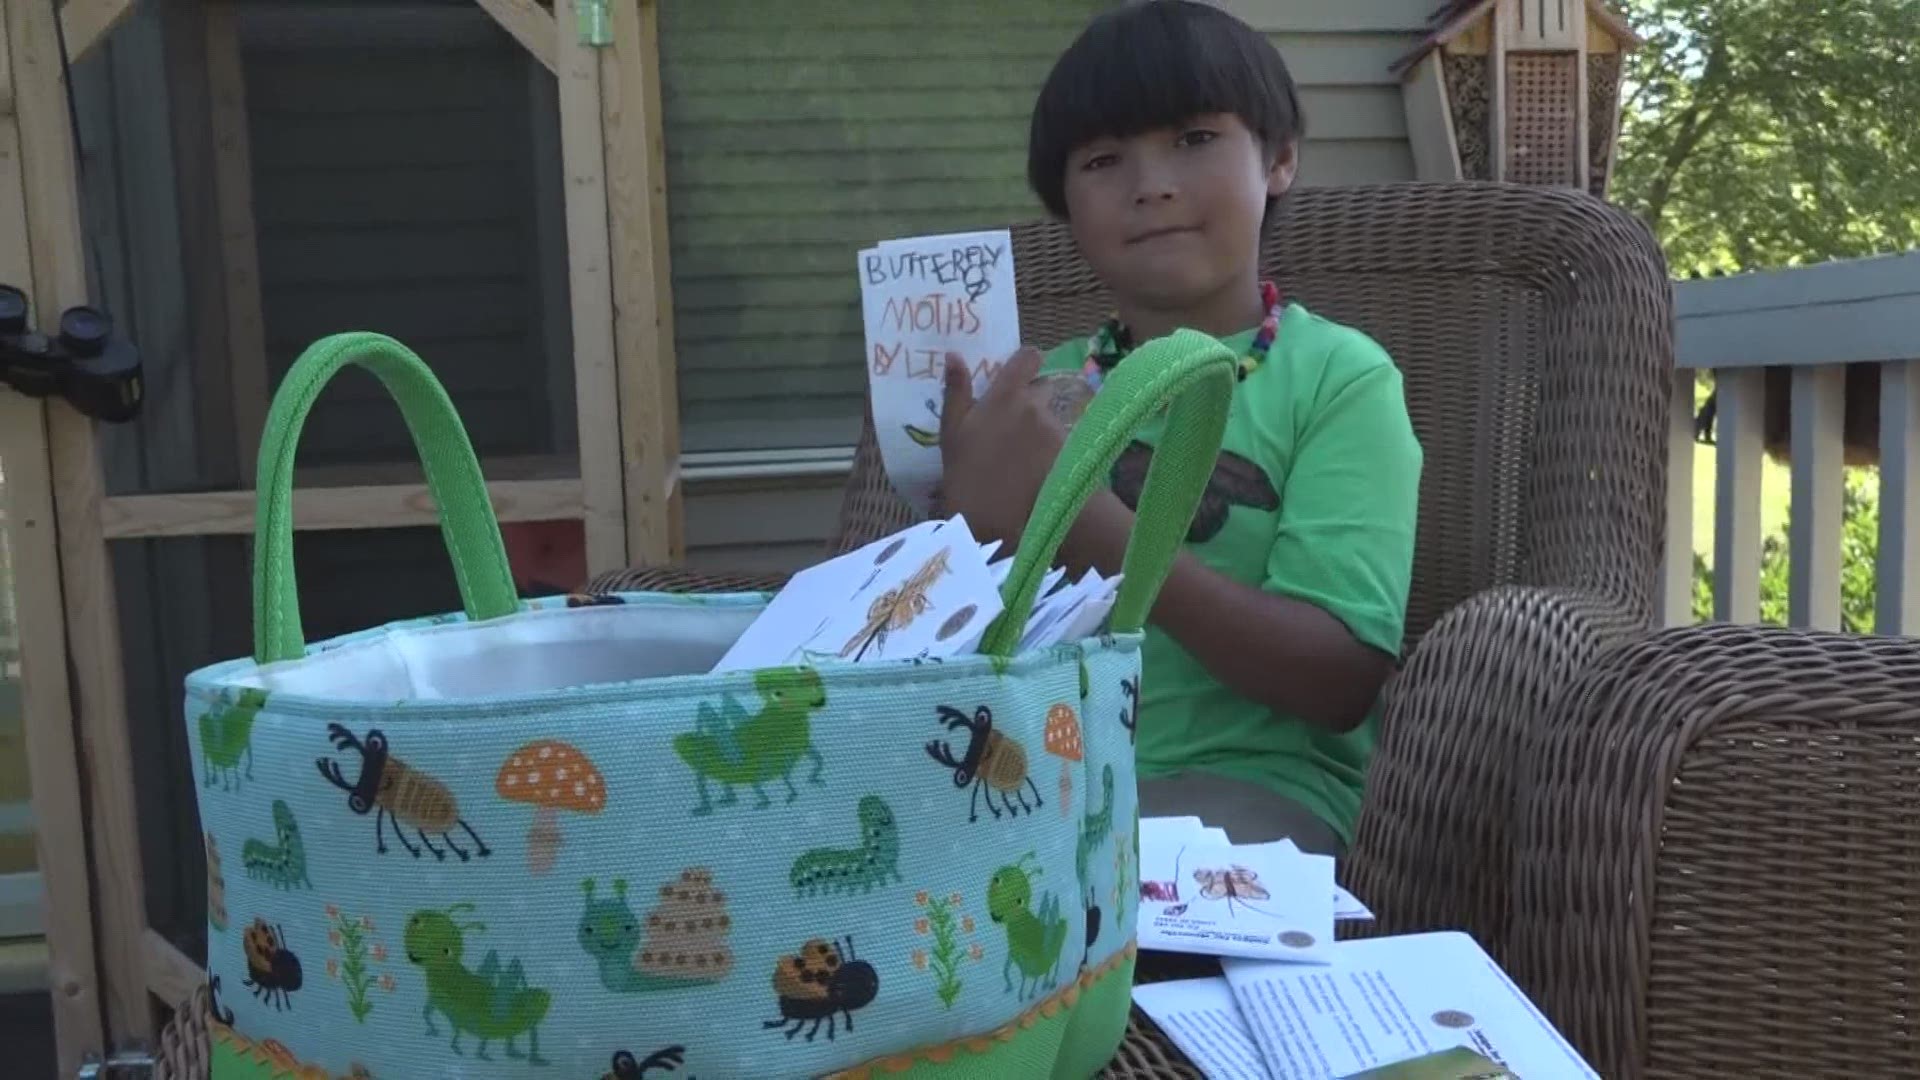 The 6-year-old is trying to save monarch butterflies one seed packet at a time.